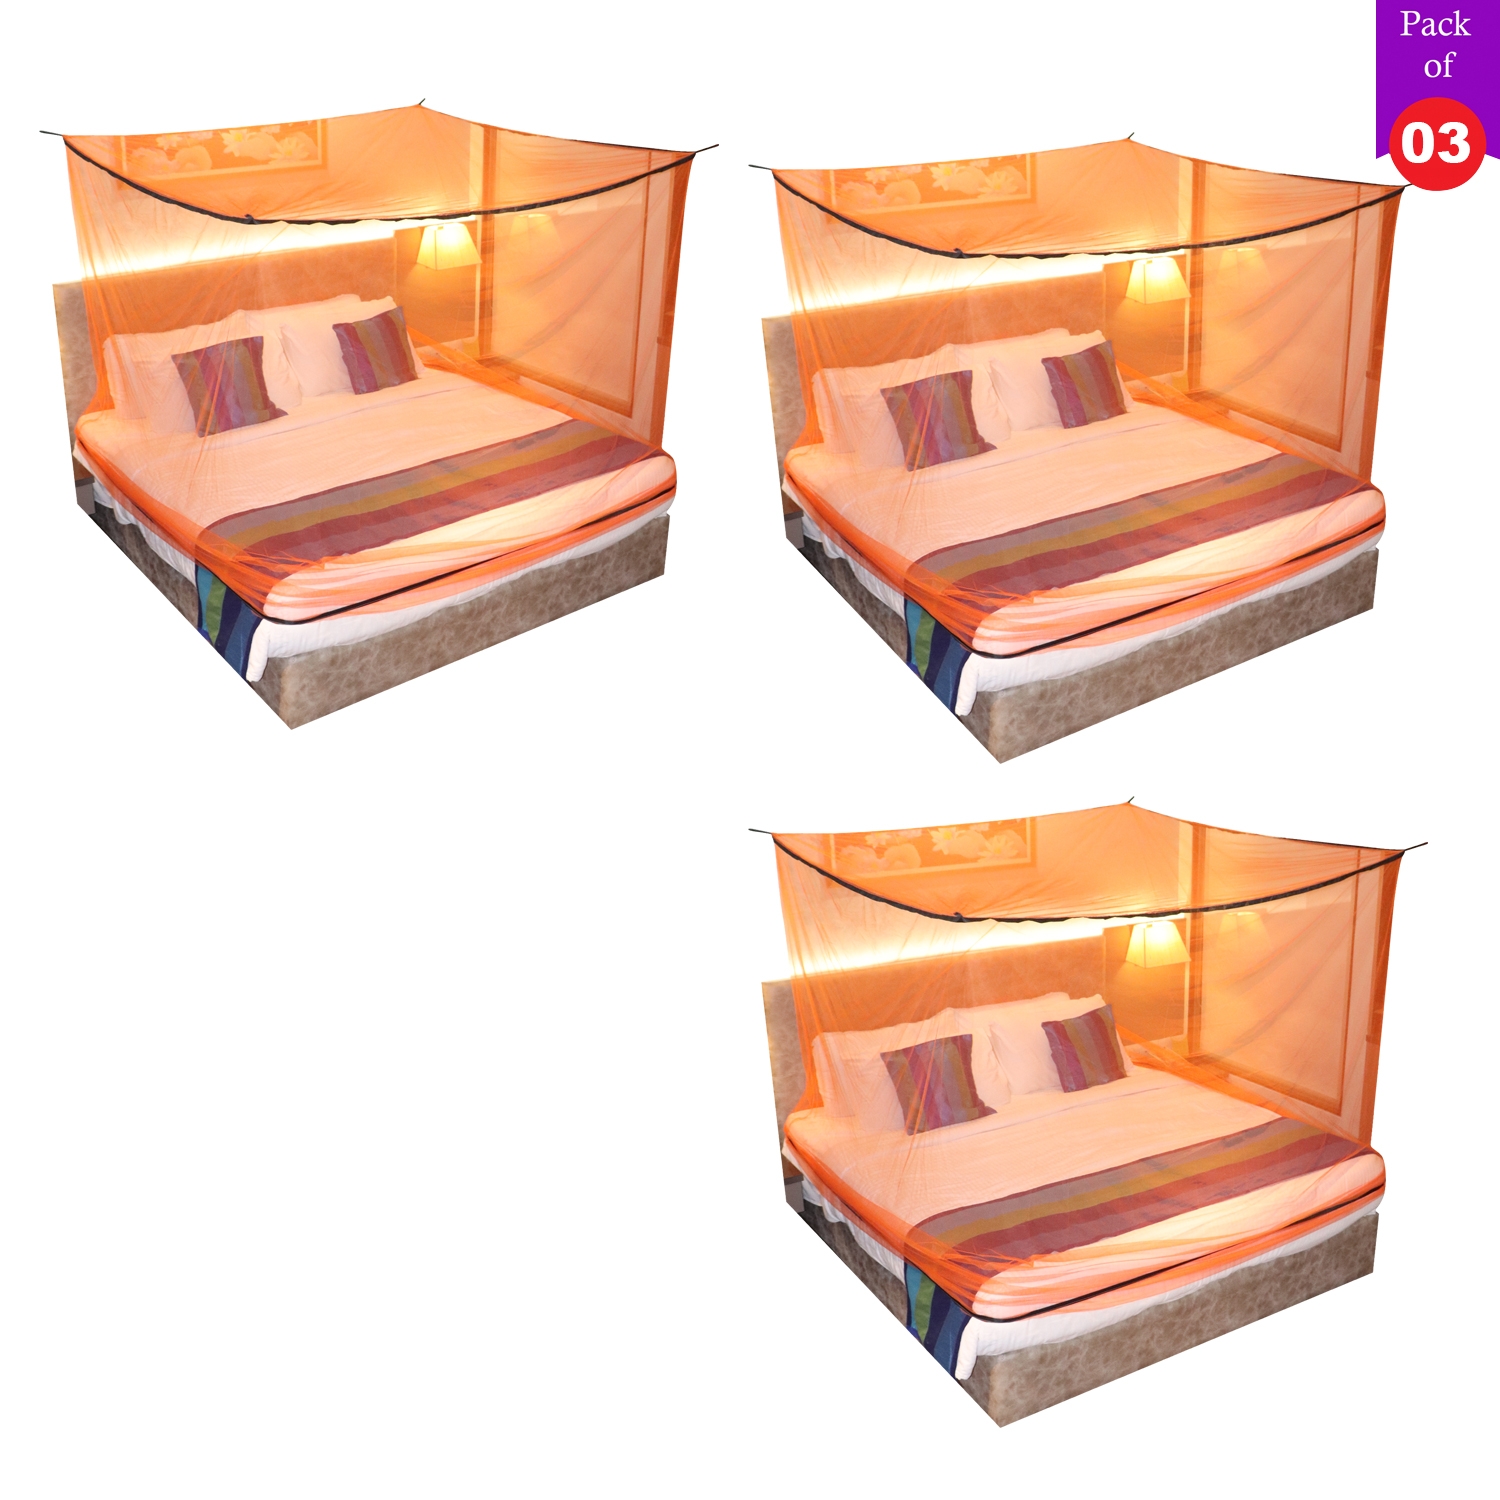 Paola Jewels | Mosquito Net for Double Bed, King-Size, Square Hanging Foldable Polyester Net Orange And Black Pack of 3 2